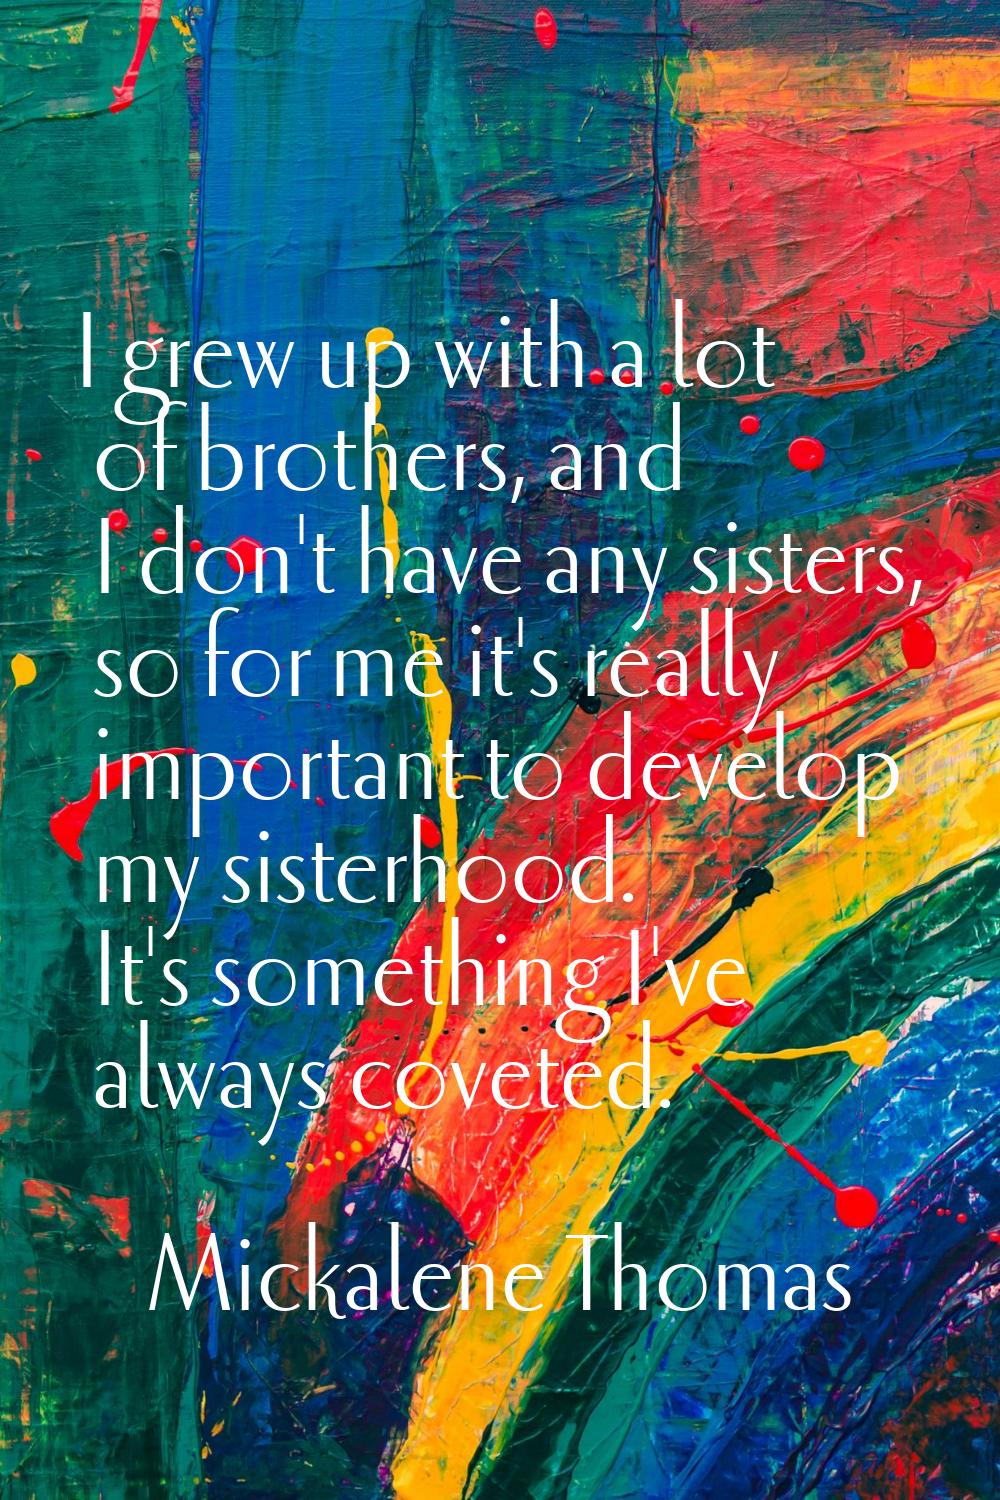 I grew up with a lot of brothers, and I don't have any sisters, so for me it's really important to 